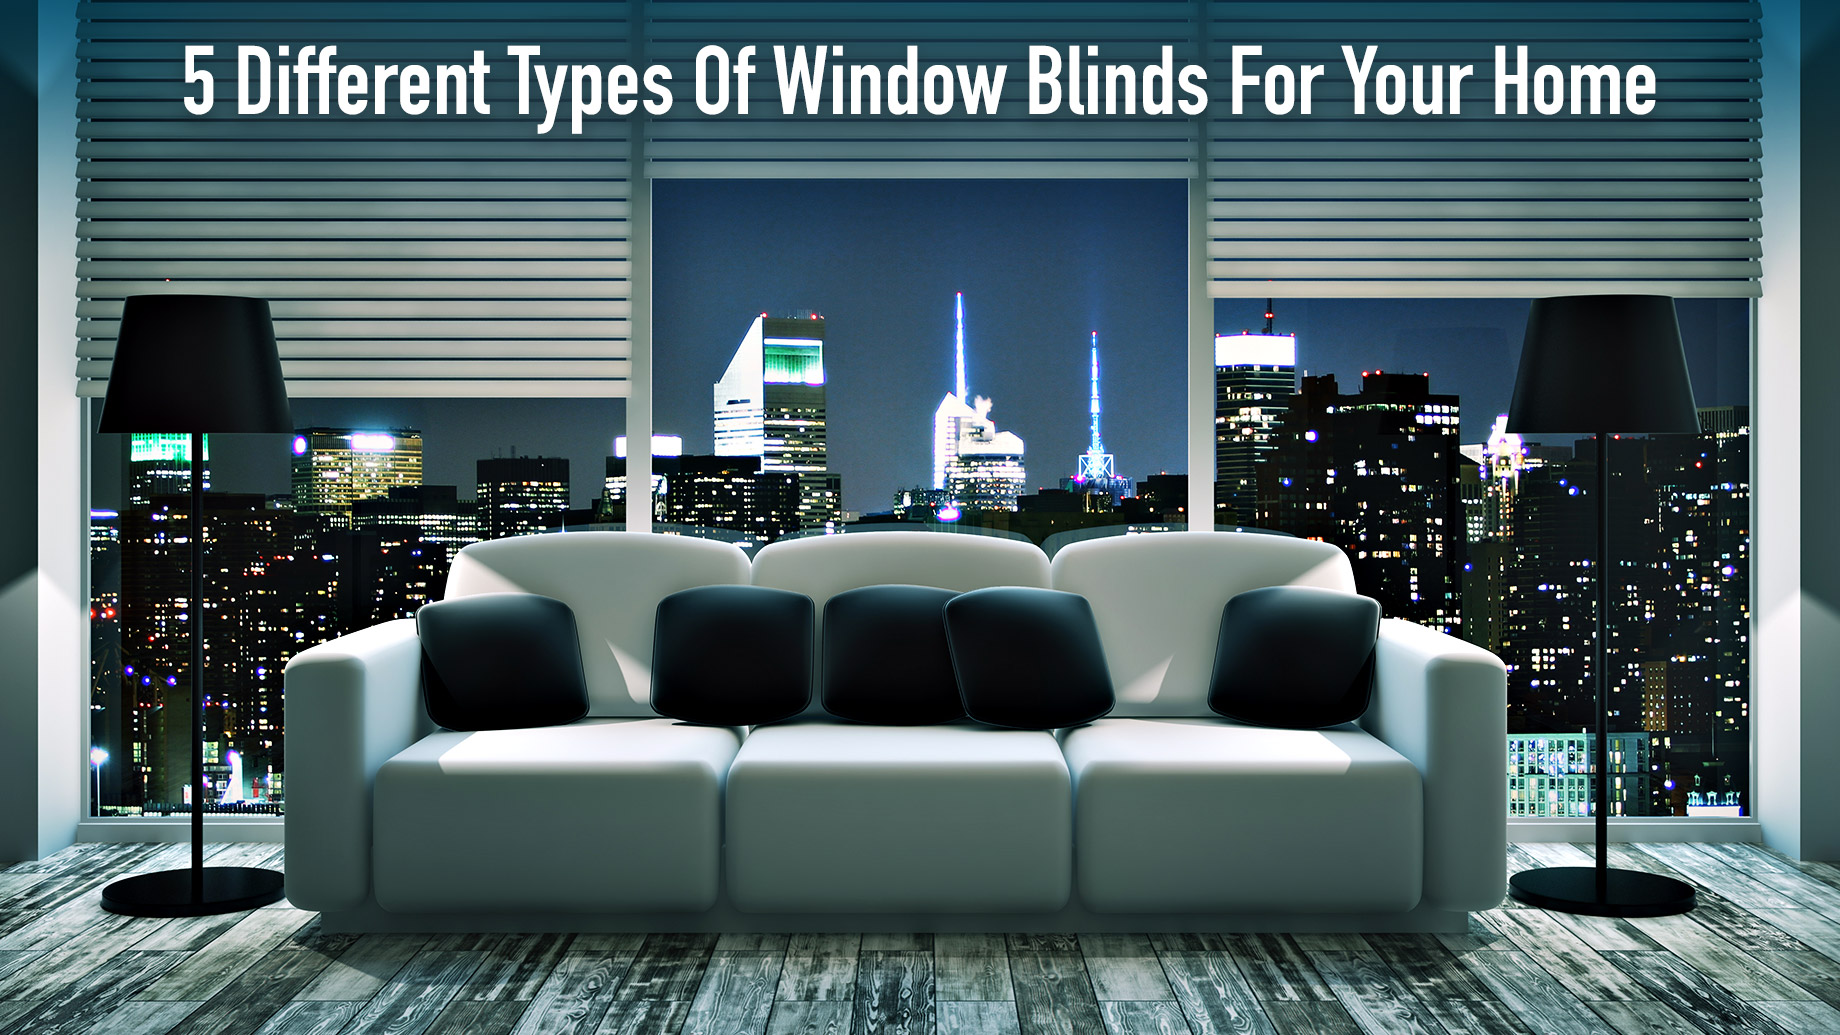 5 Different Types Of Window Blinds For Your Home